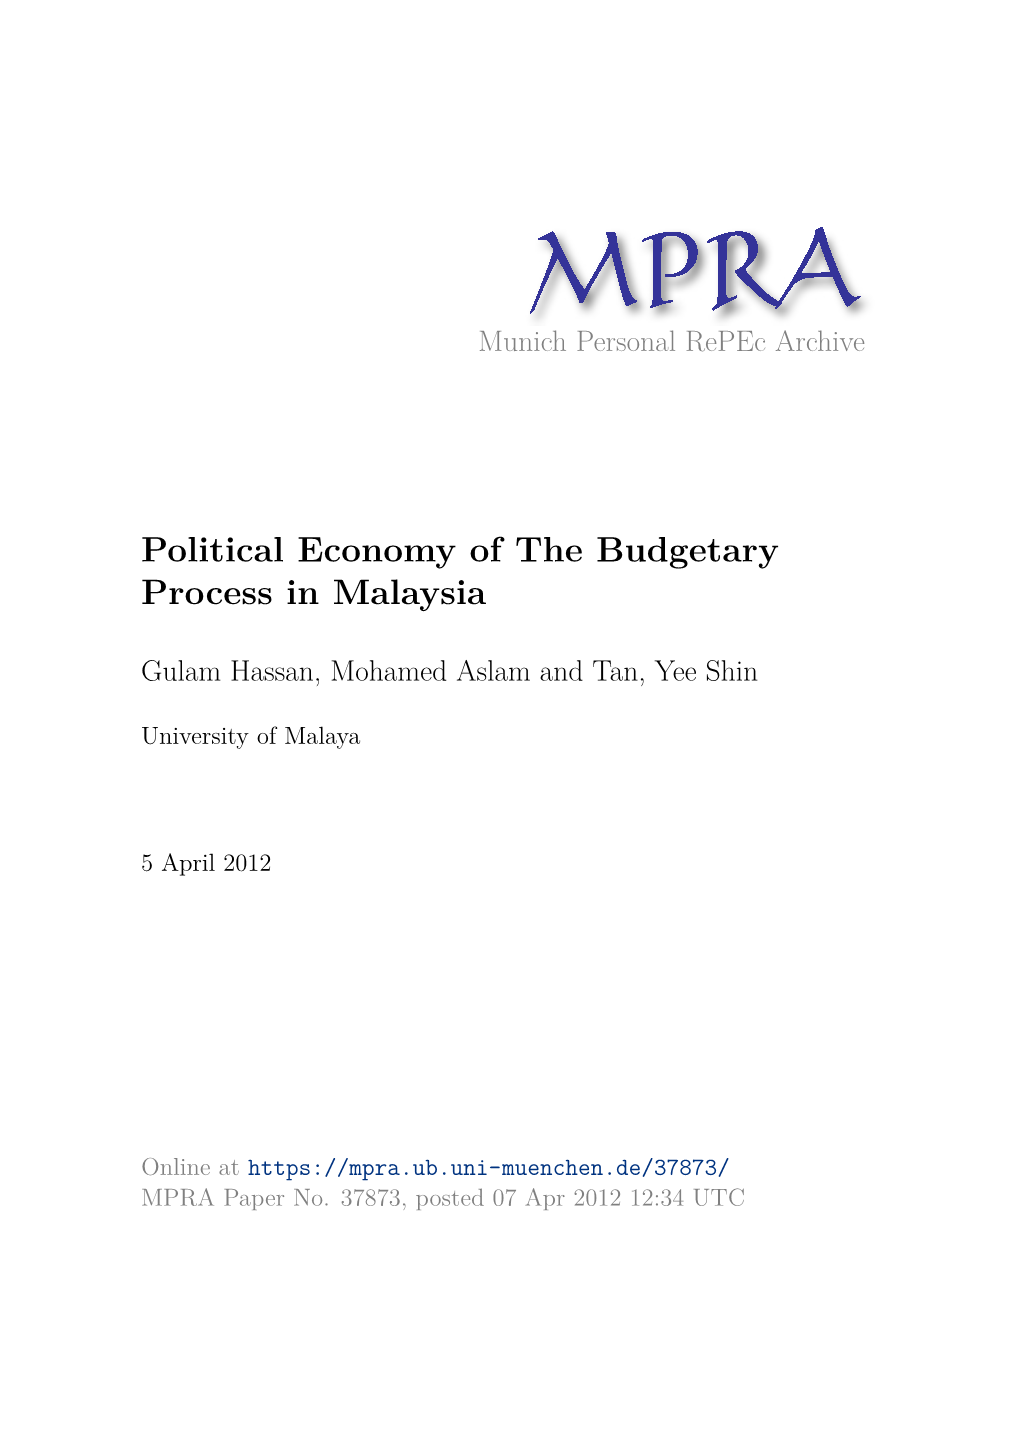 Political Economy of Budgetary Policy in Malaysia